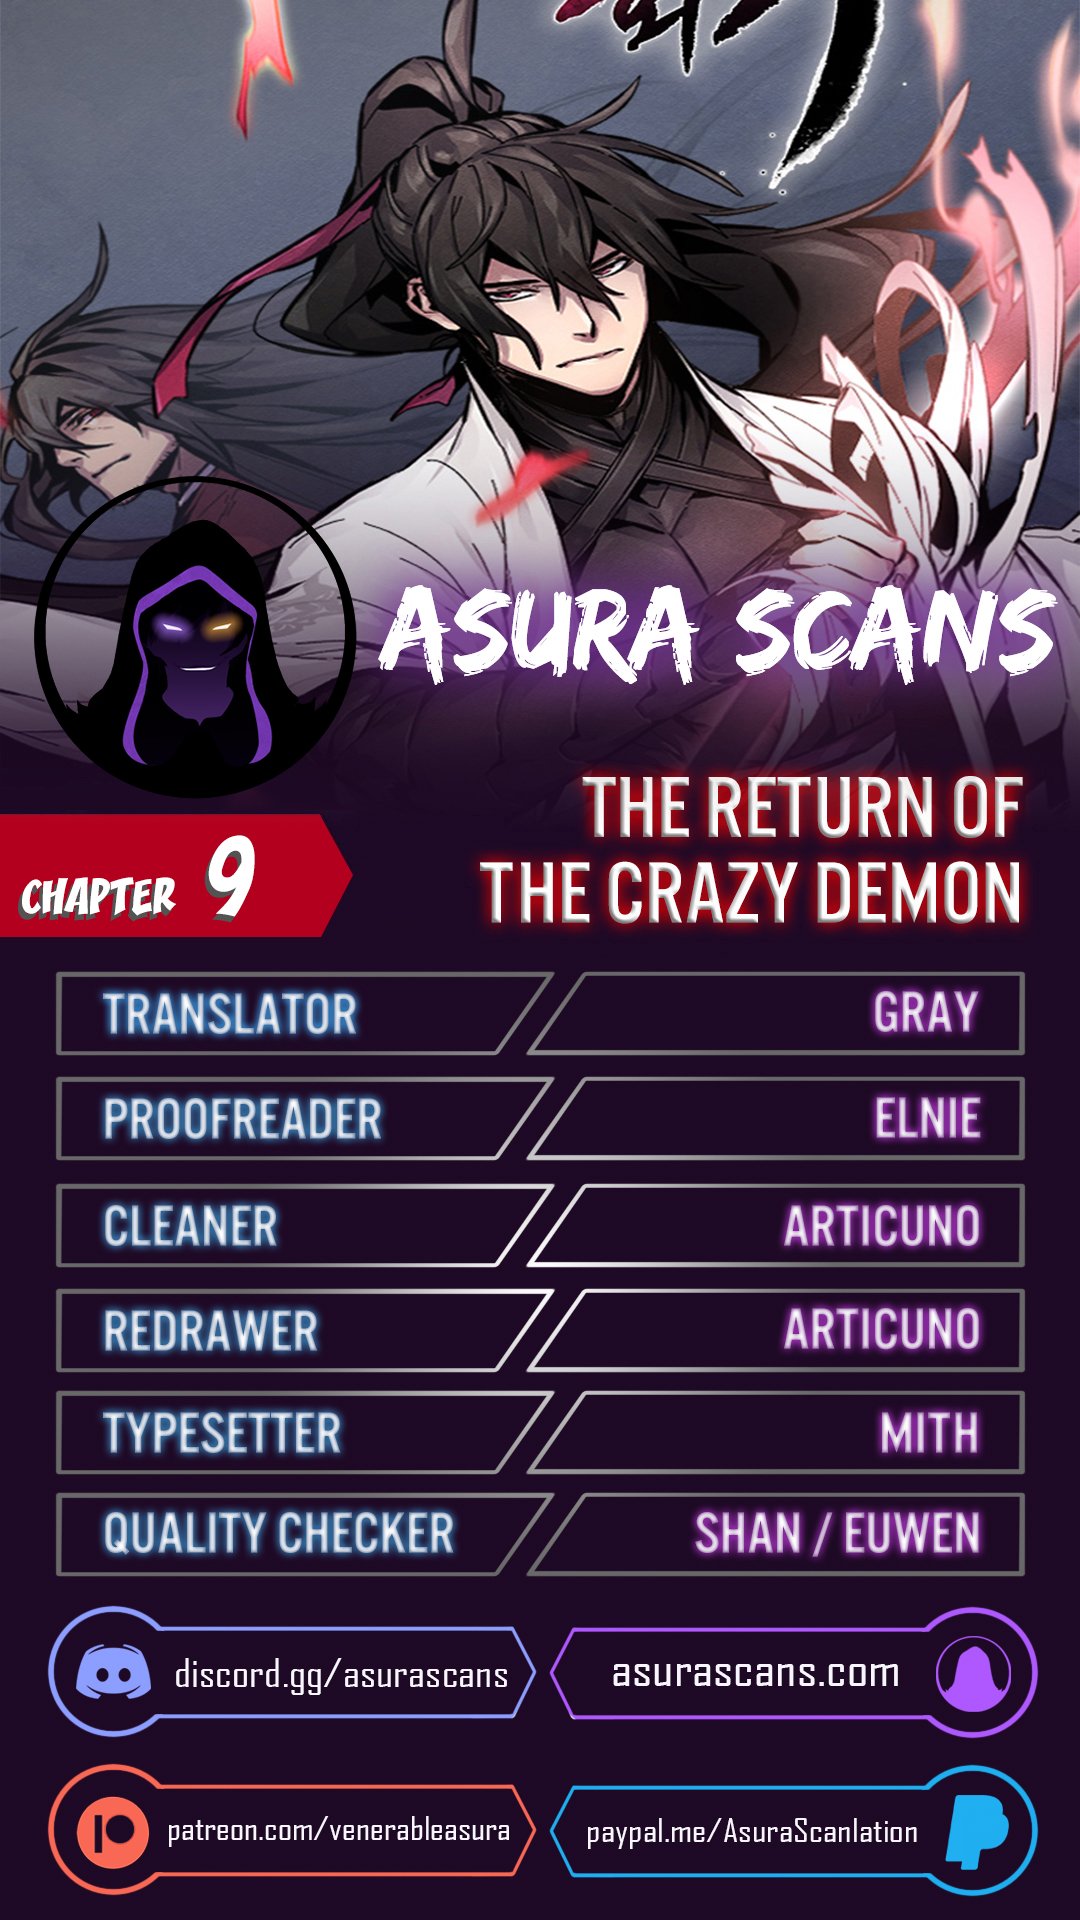 The Return of the Crazy Demon - Chapter 18550 - Image 1